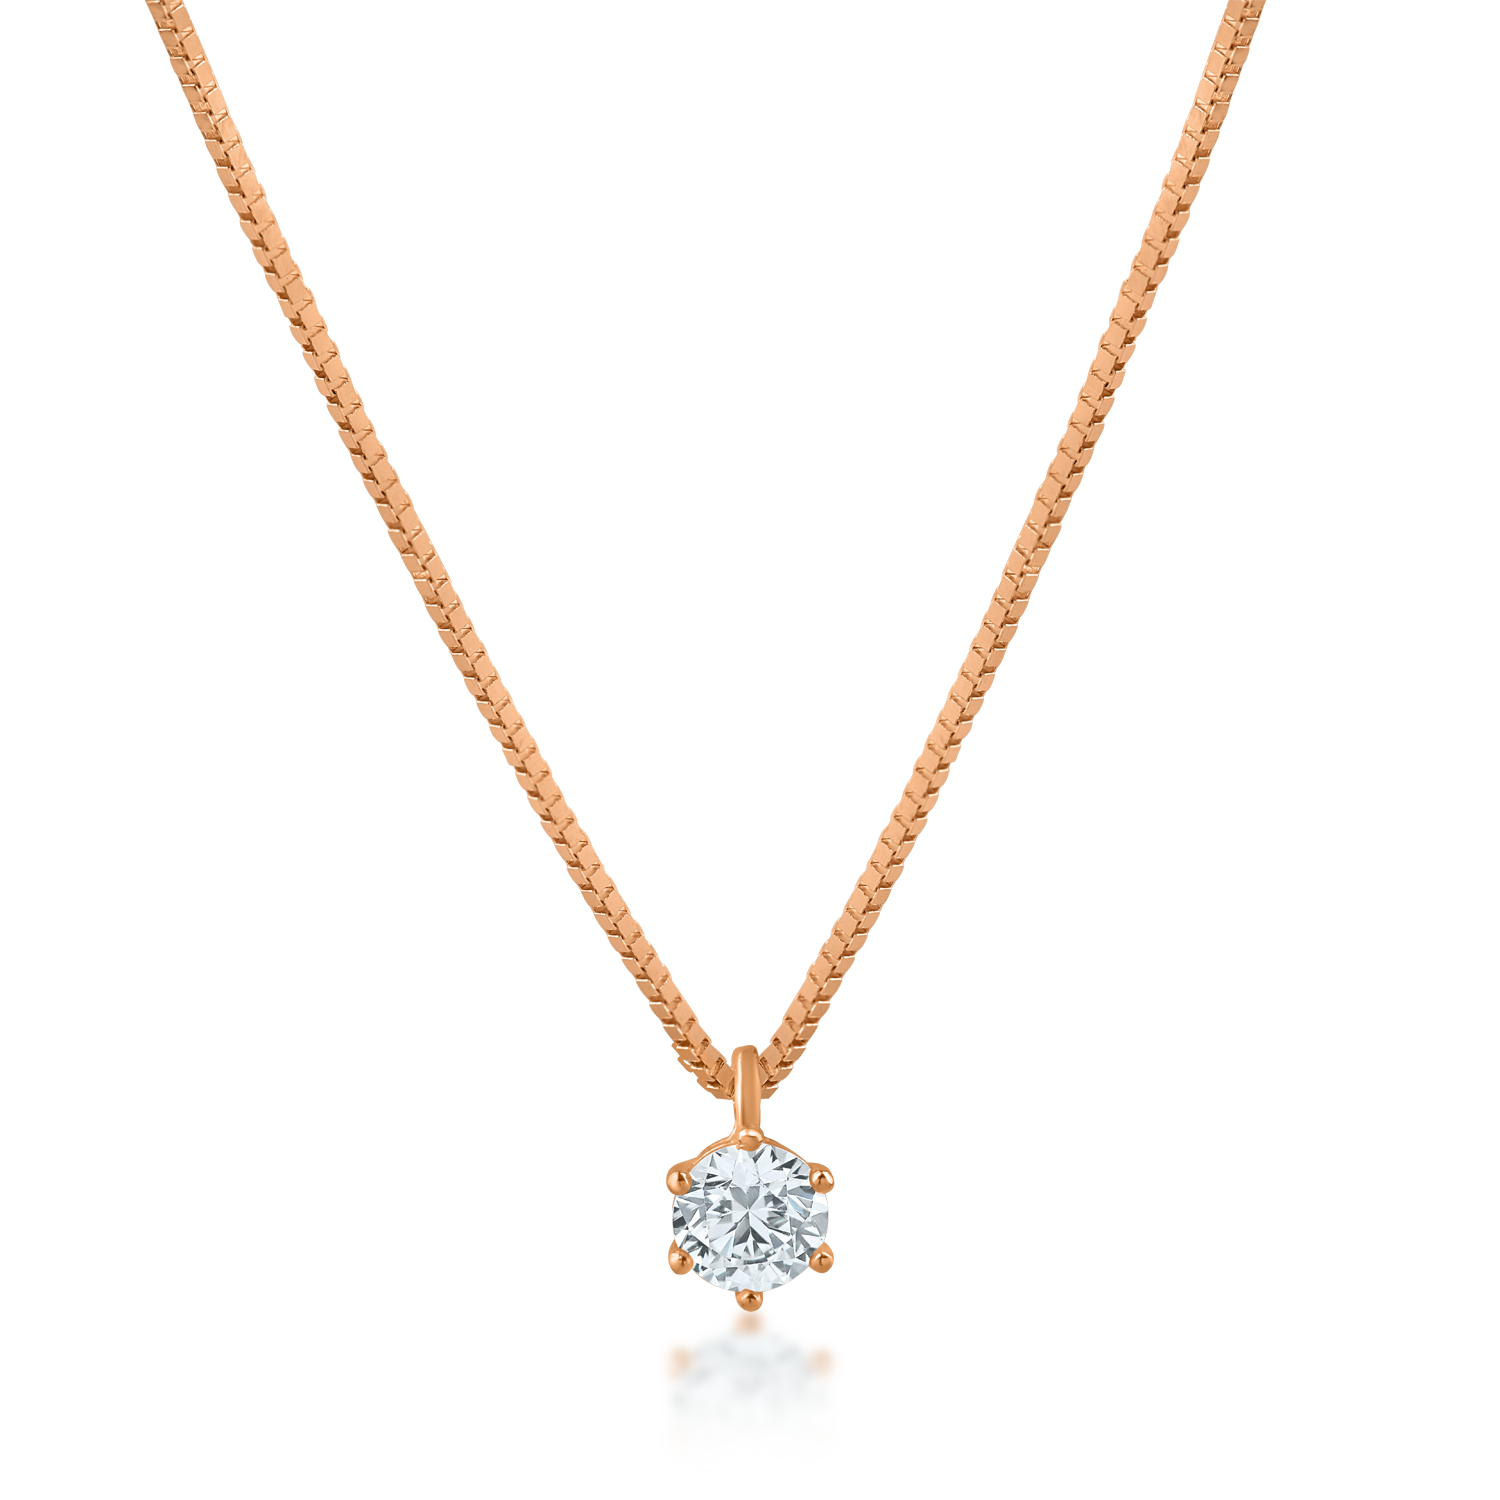 Yellow-rose gold pendant necklace